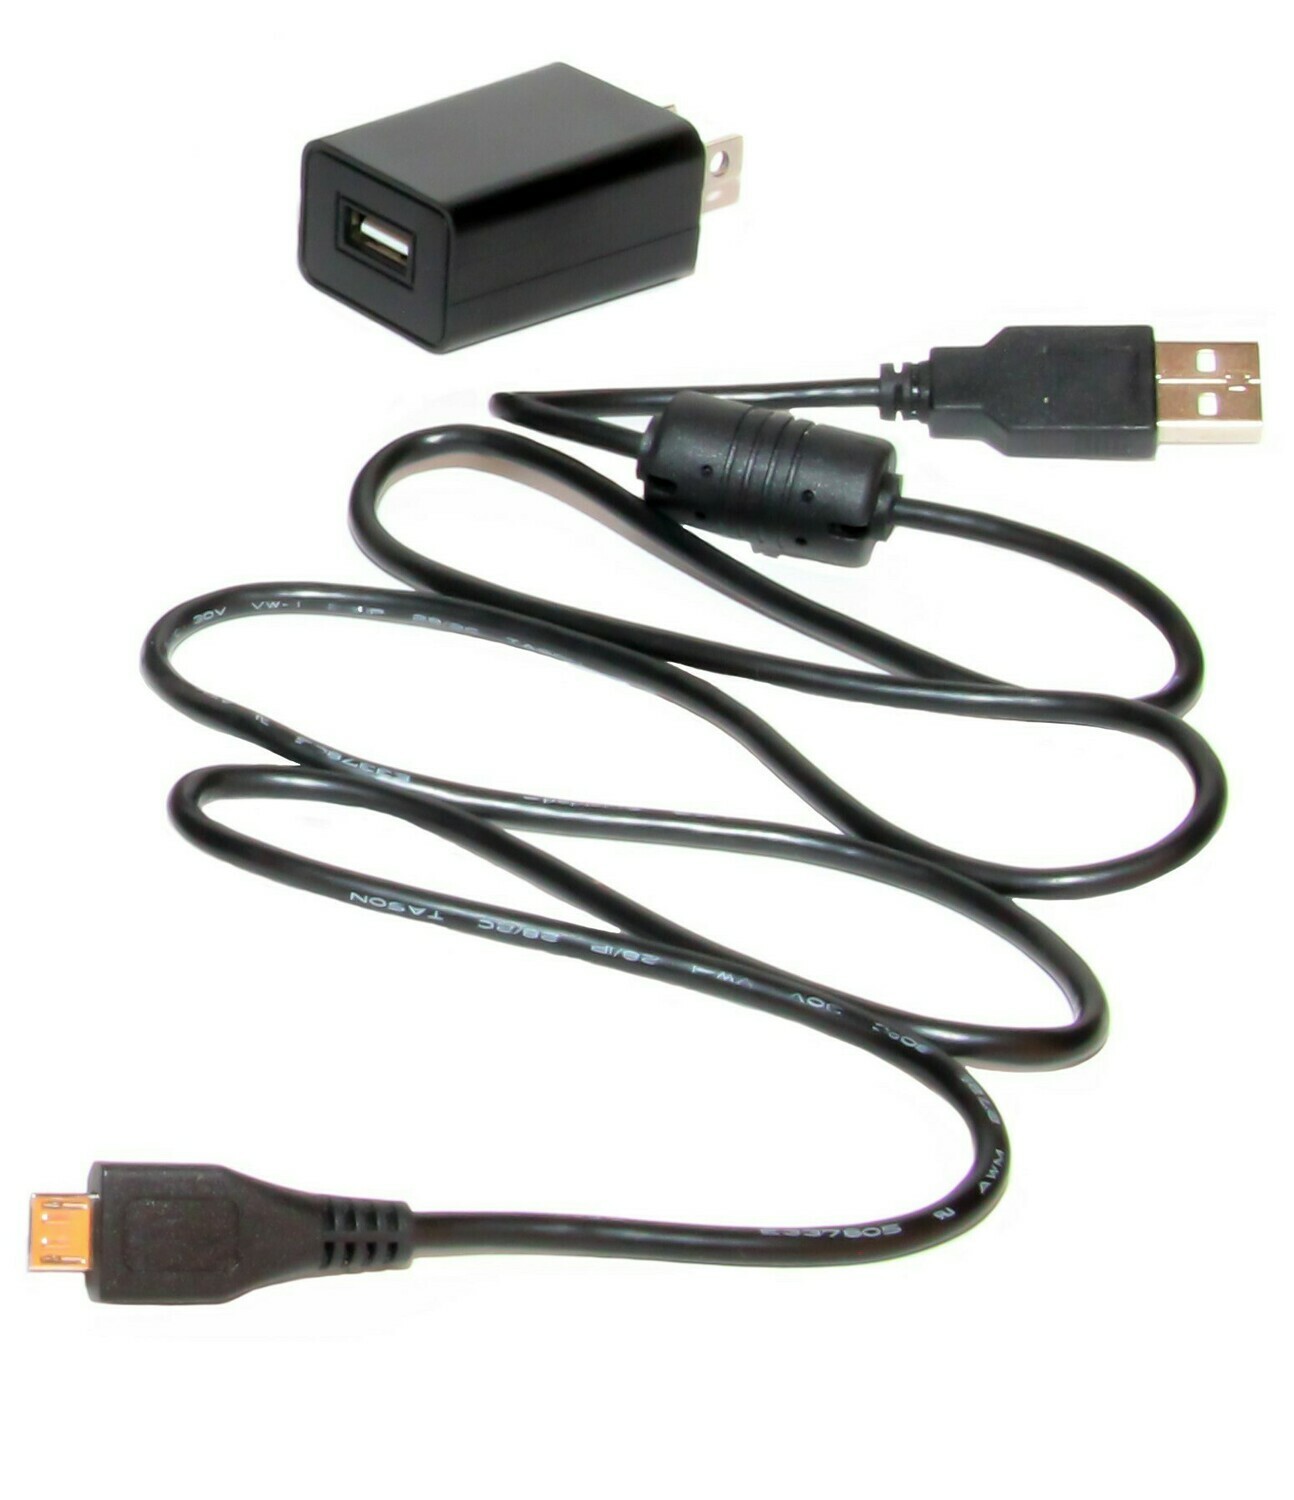 USB Connection Cable w/ Charging Block